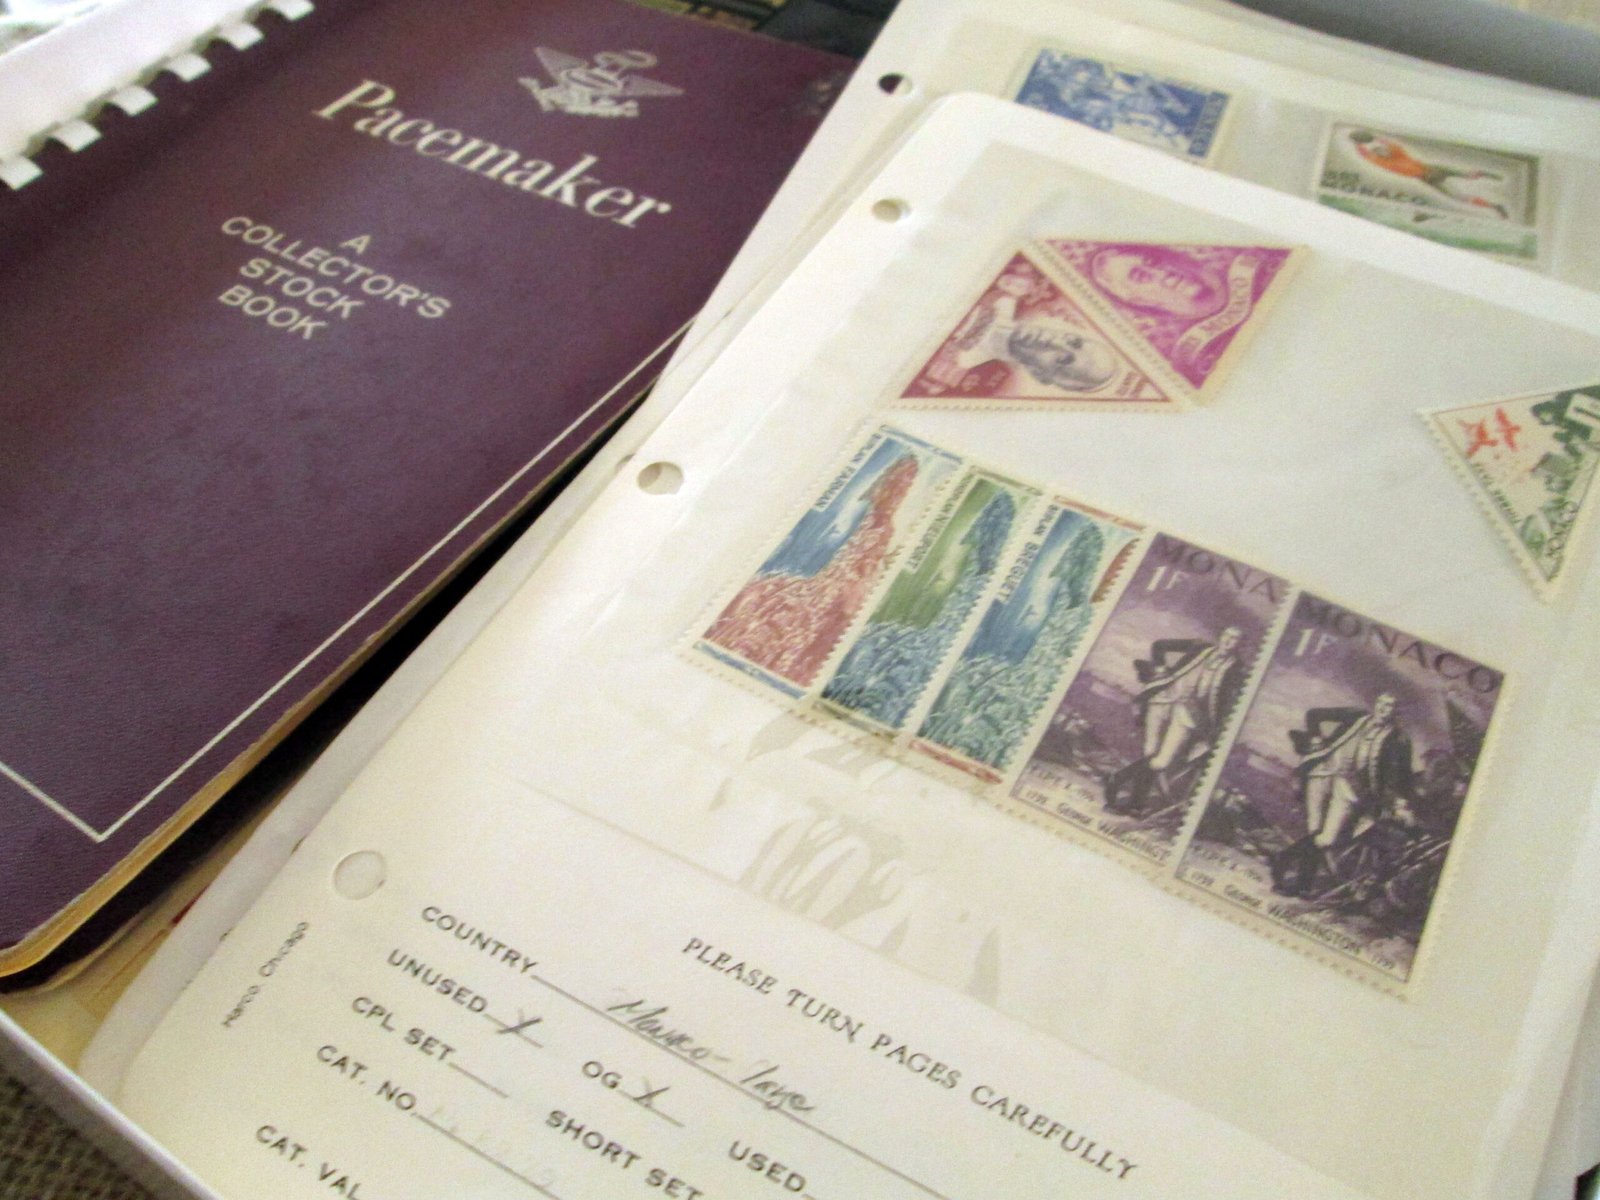 Lot # 1 U | Treasure/Mystery Box. This lot consists of everything we don’t need in our regular stock. Singles stamps, sets, covers , cards, almost anything philatelic. Usually heavy on Austria and German related areas but could contain anything philatelic. There will be a very high catalog value here!